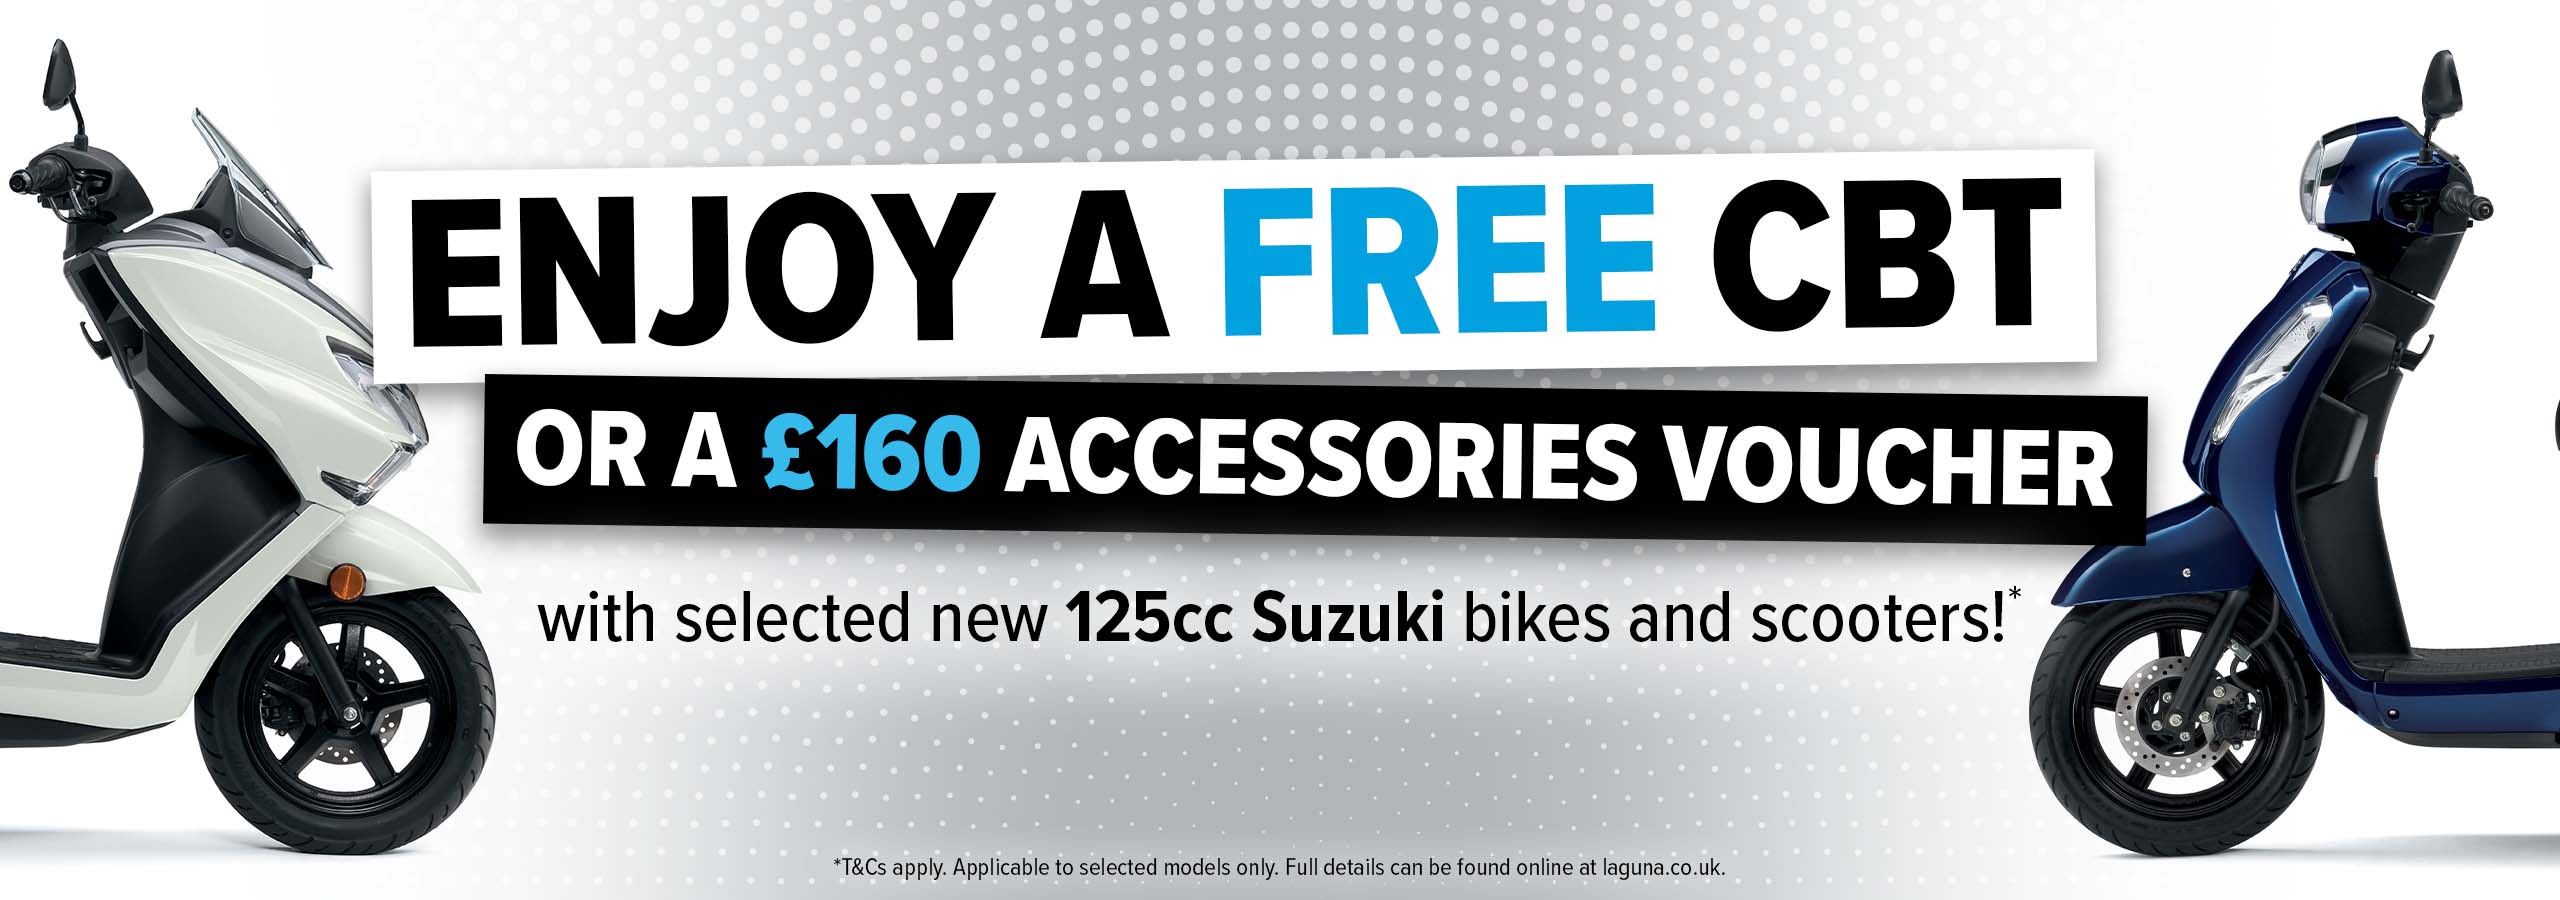 Free CBT or Accessories Voucher with selected 125cc motorcycles and scooters at Laguna Motorcycles